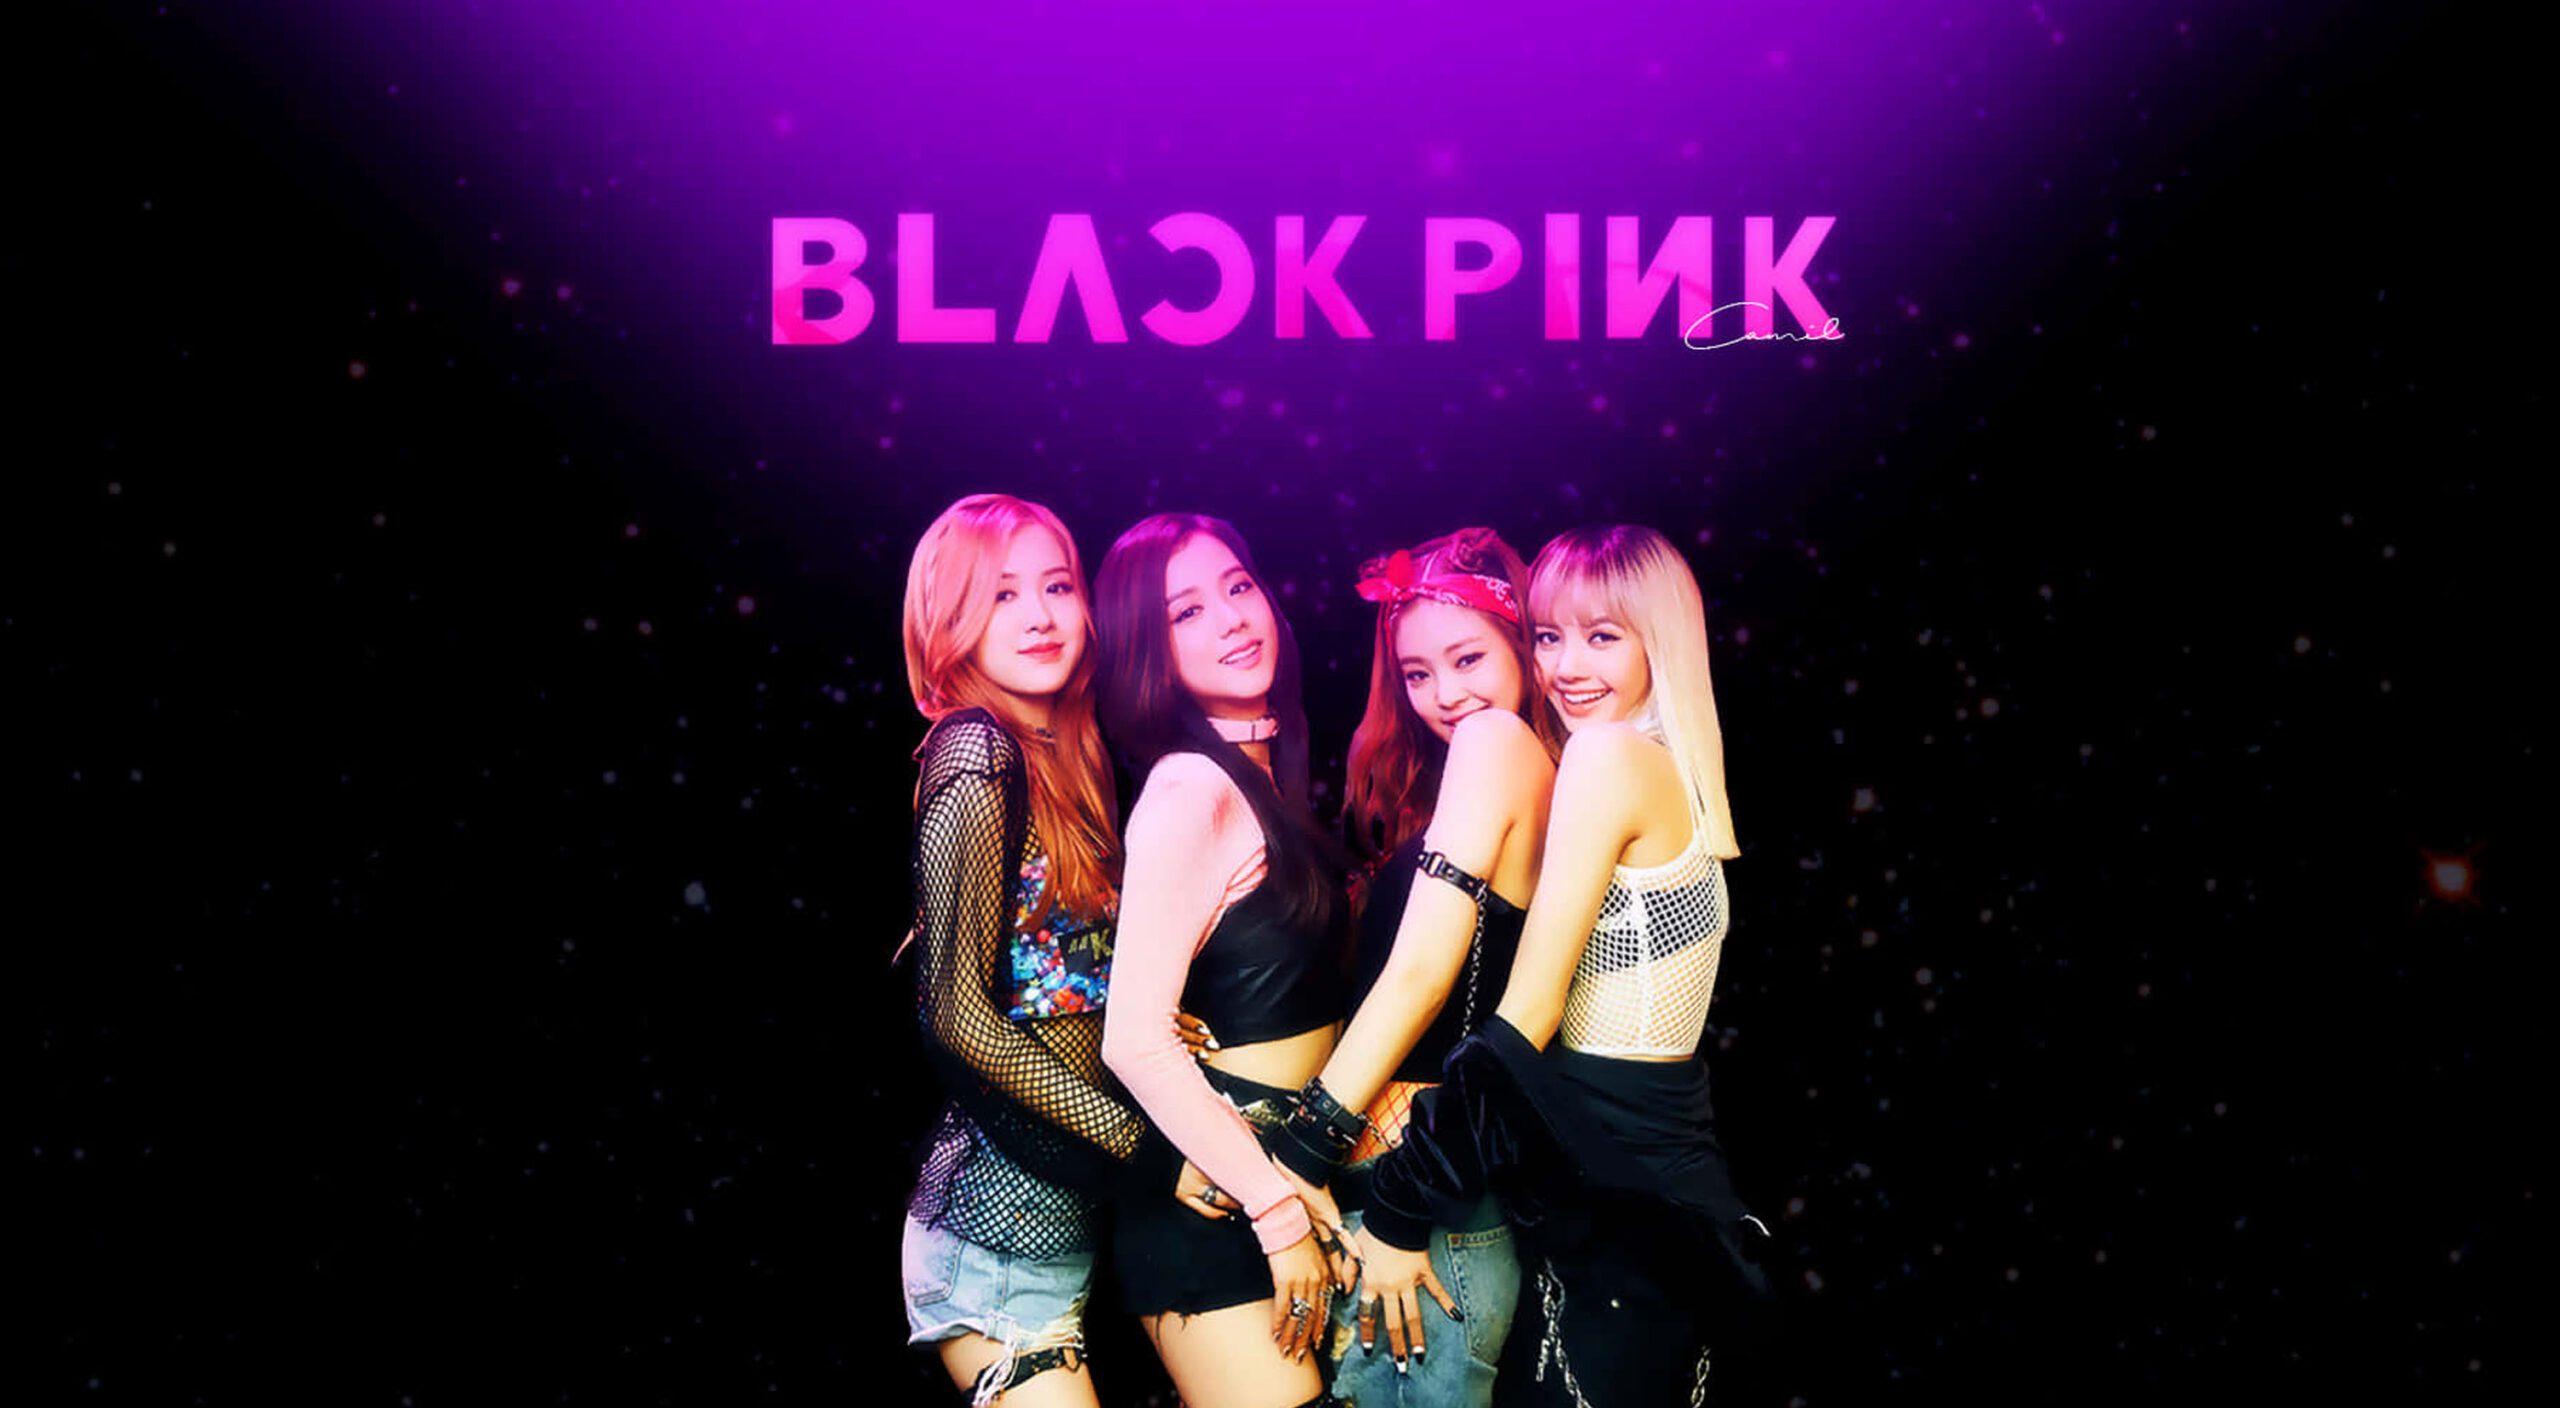 7 years on from debut, Blackpink blooms as most successful female